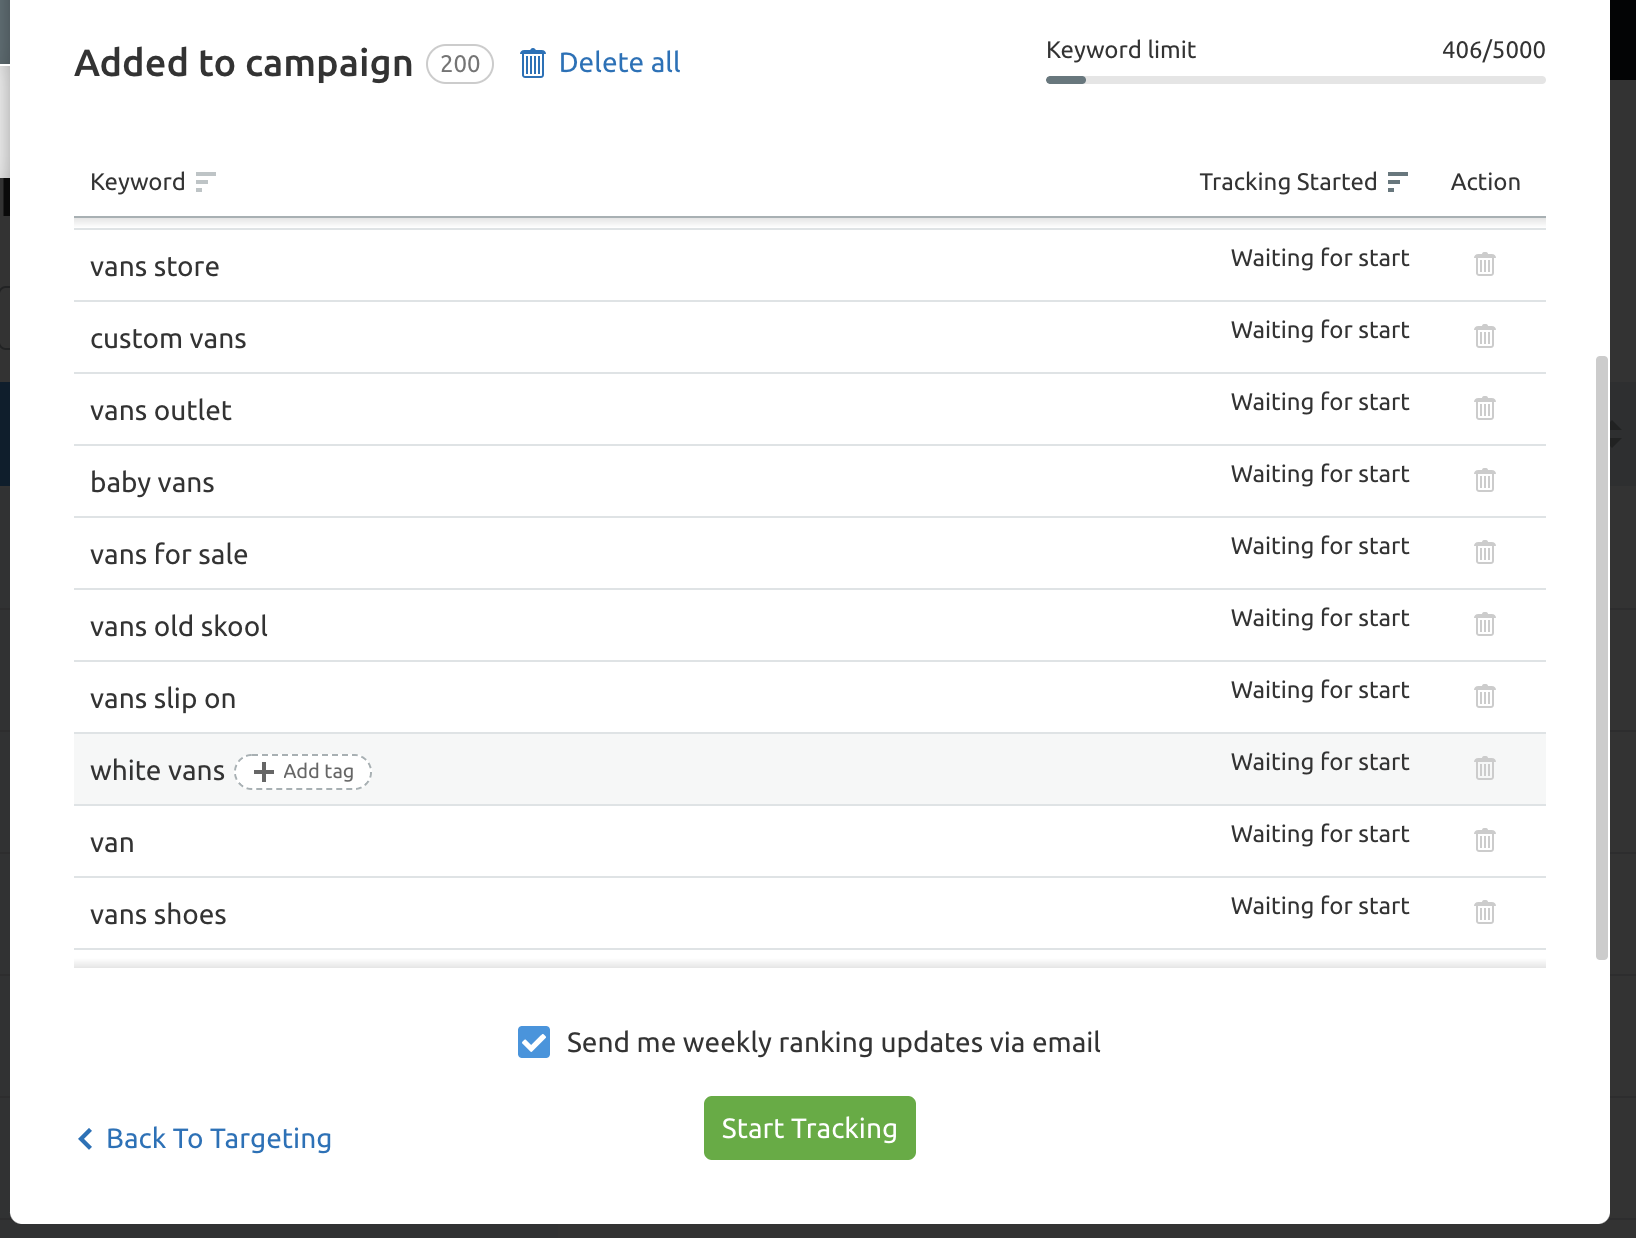 Adding keywords to Position Tracking campaign